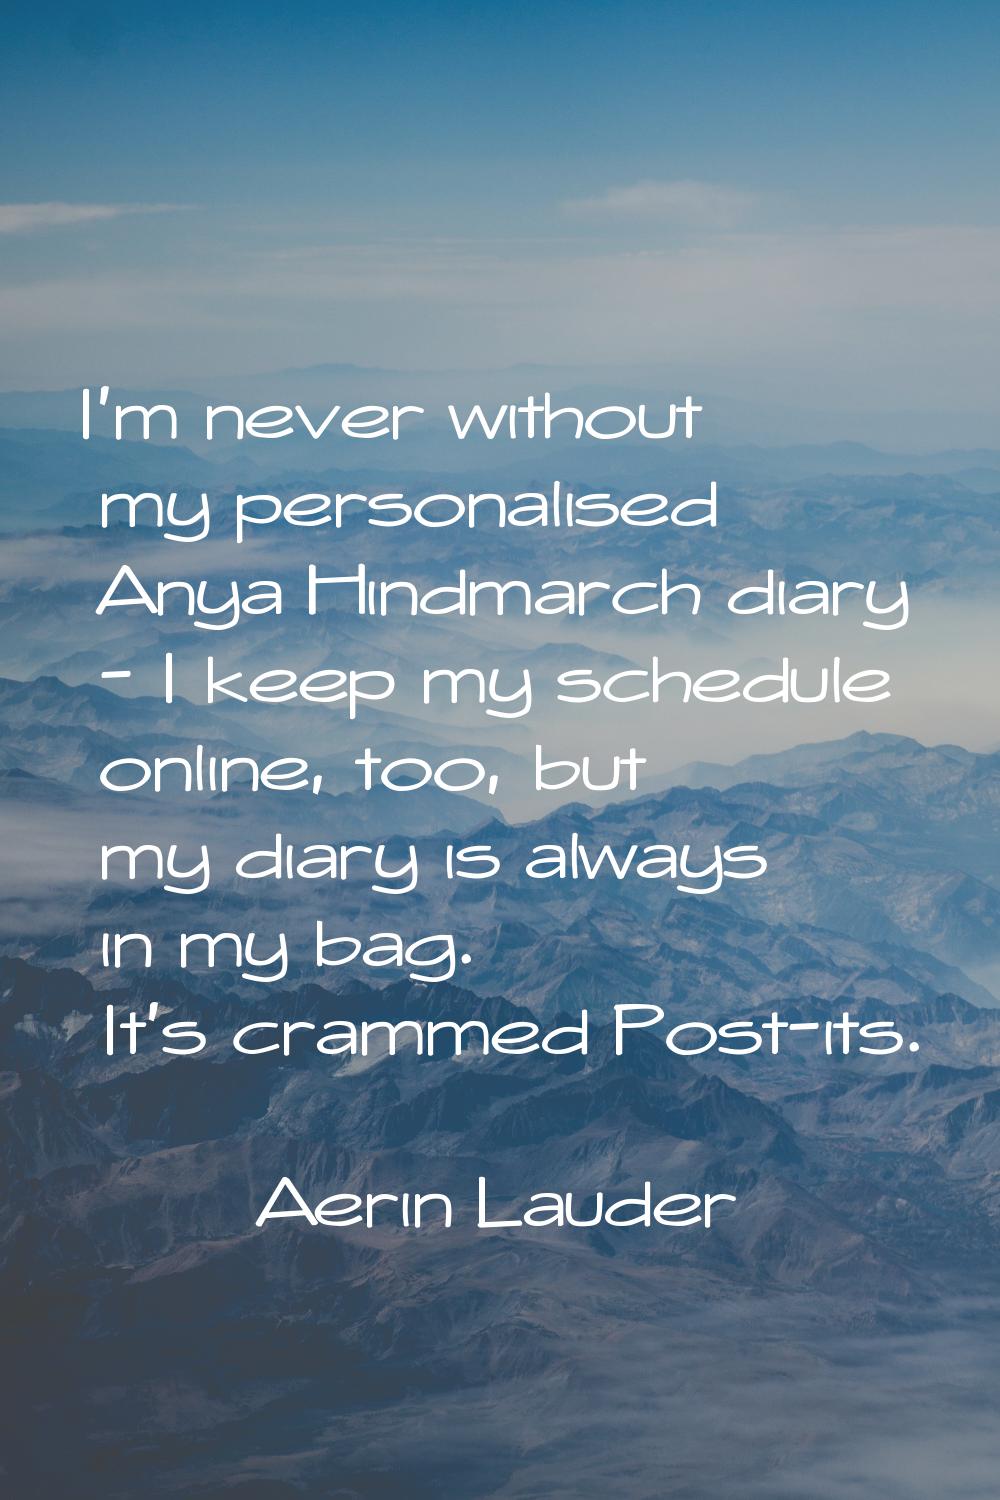 I'm never without my personalised Anya Hindmarch diary - I keep my schedule online, too, but my dia